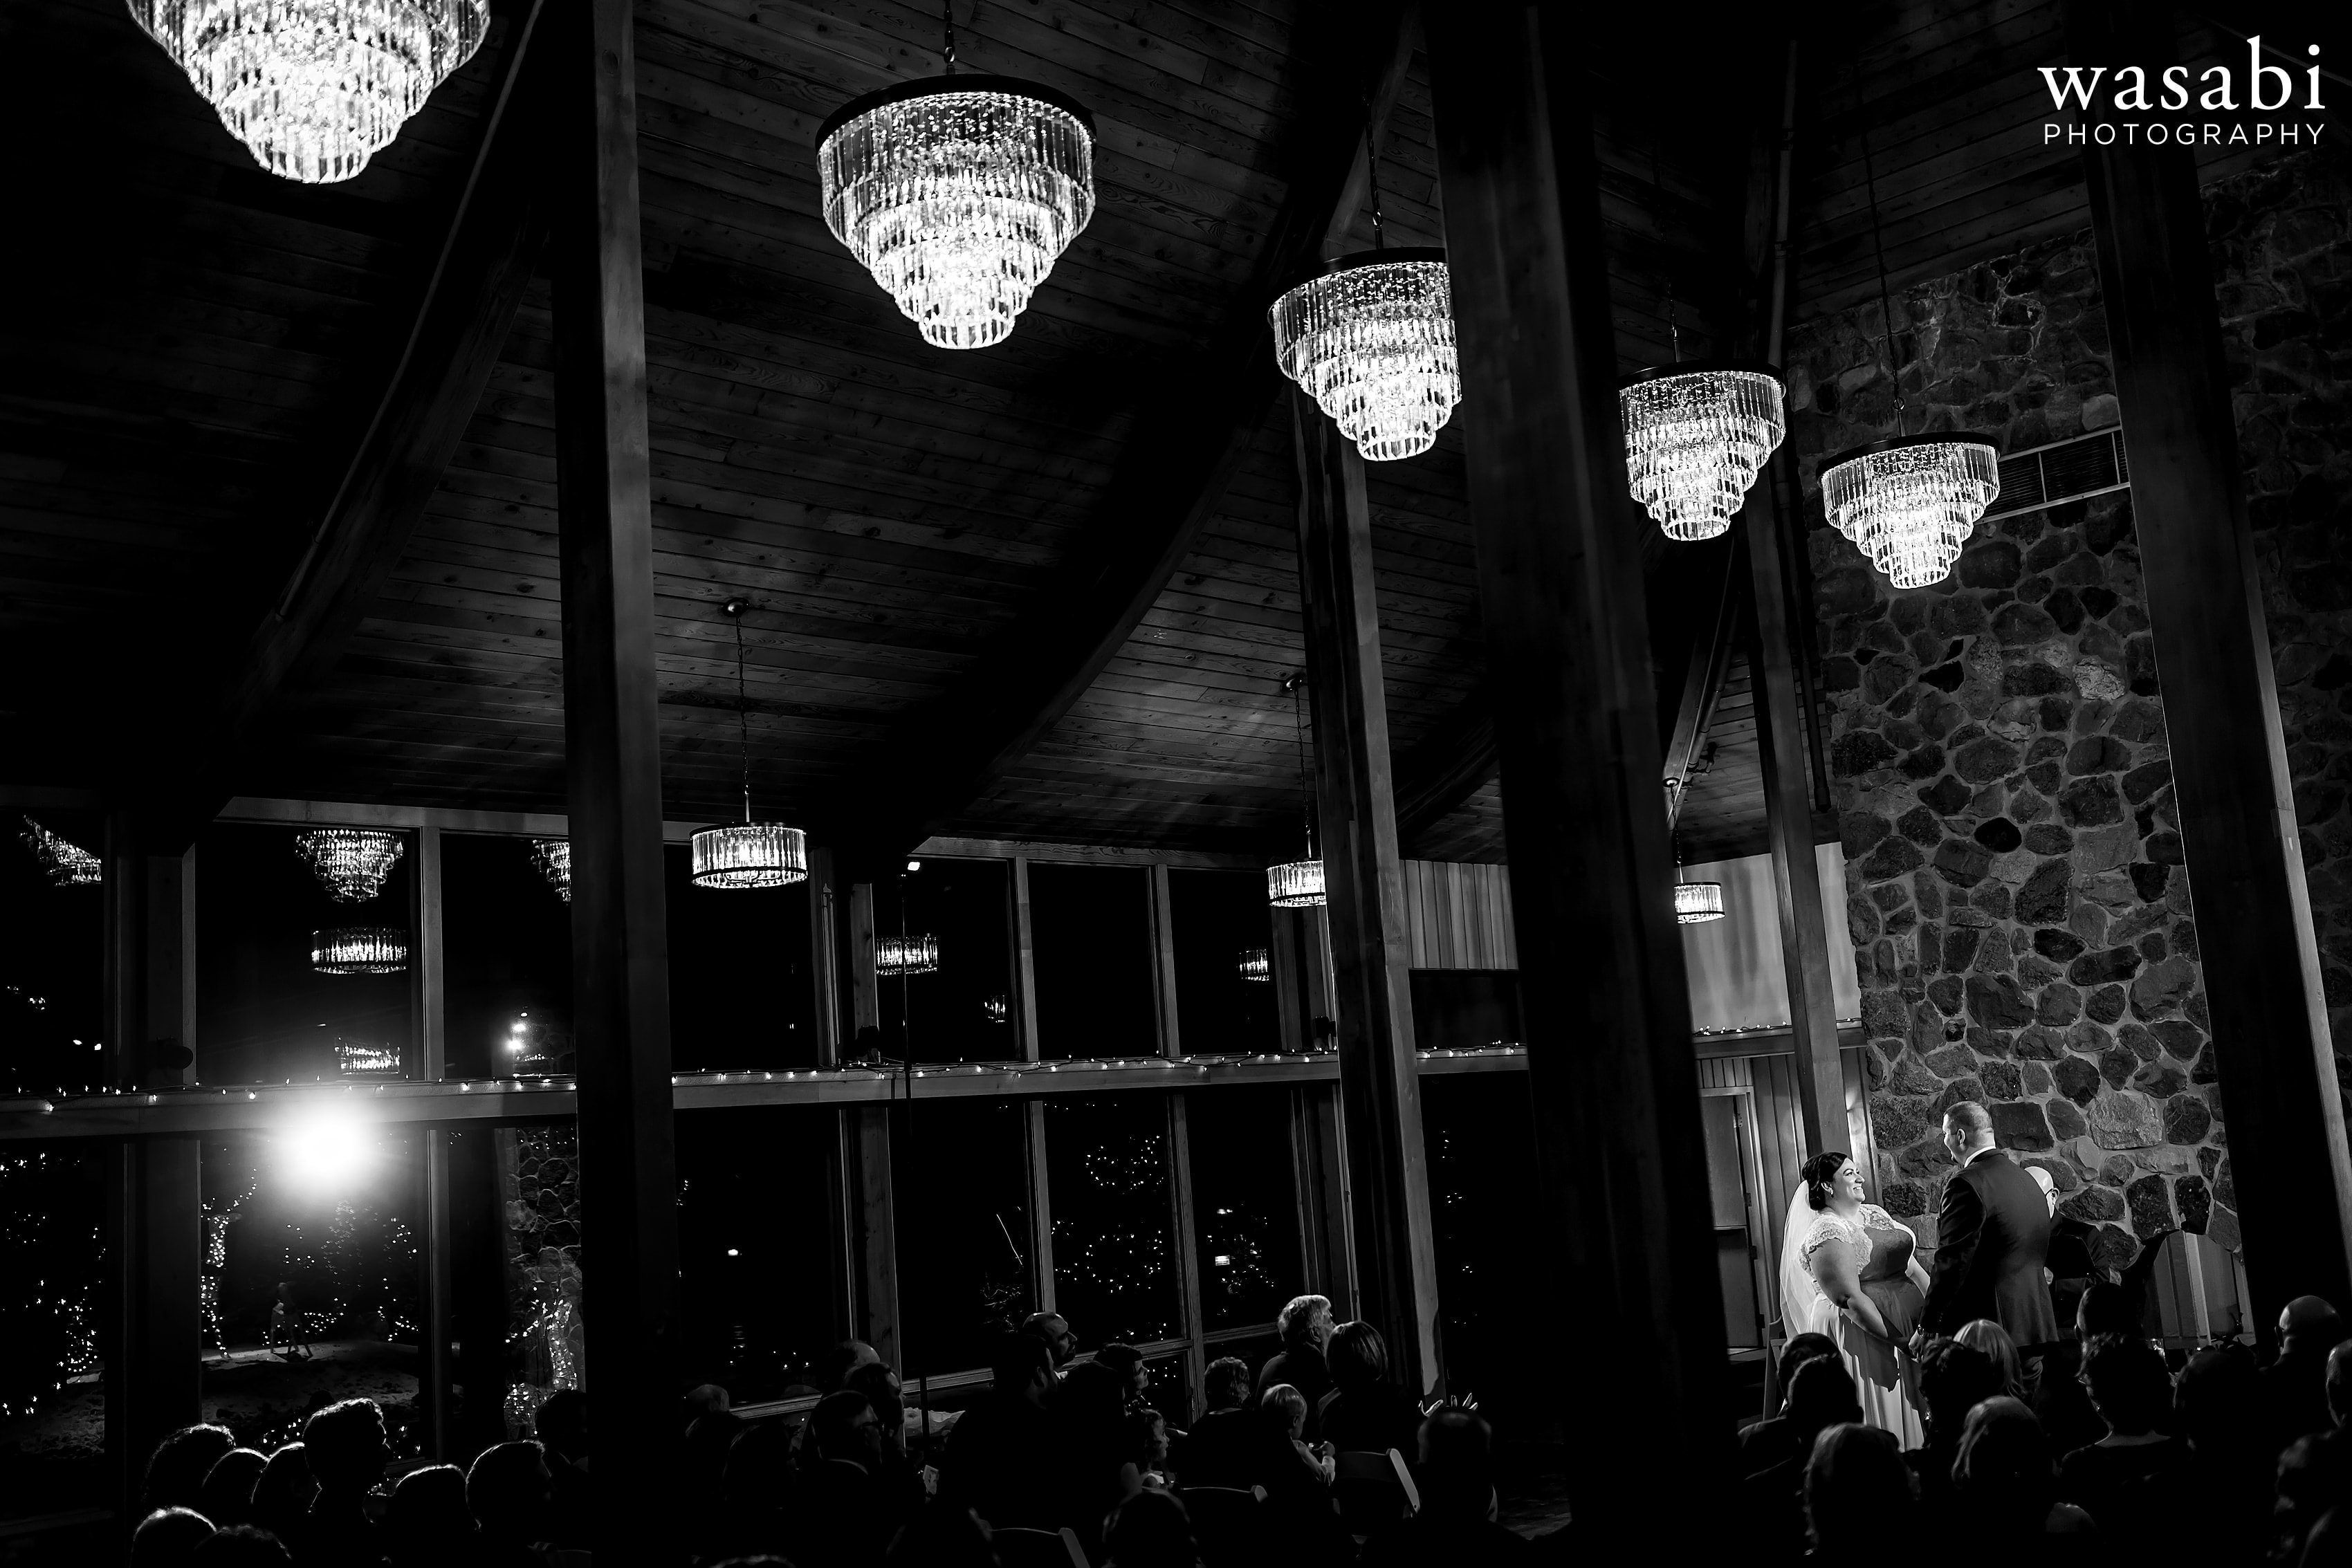 wide angle photo showing venue with bride and groom during Oak Brook Bath and Tennis Club wedding ceremony